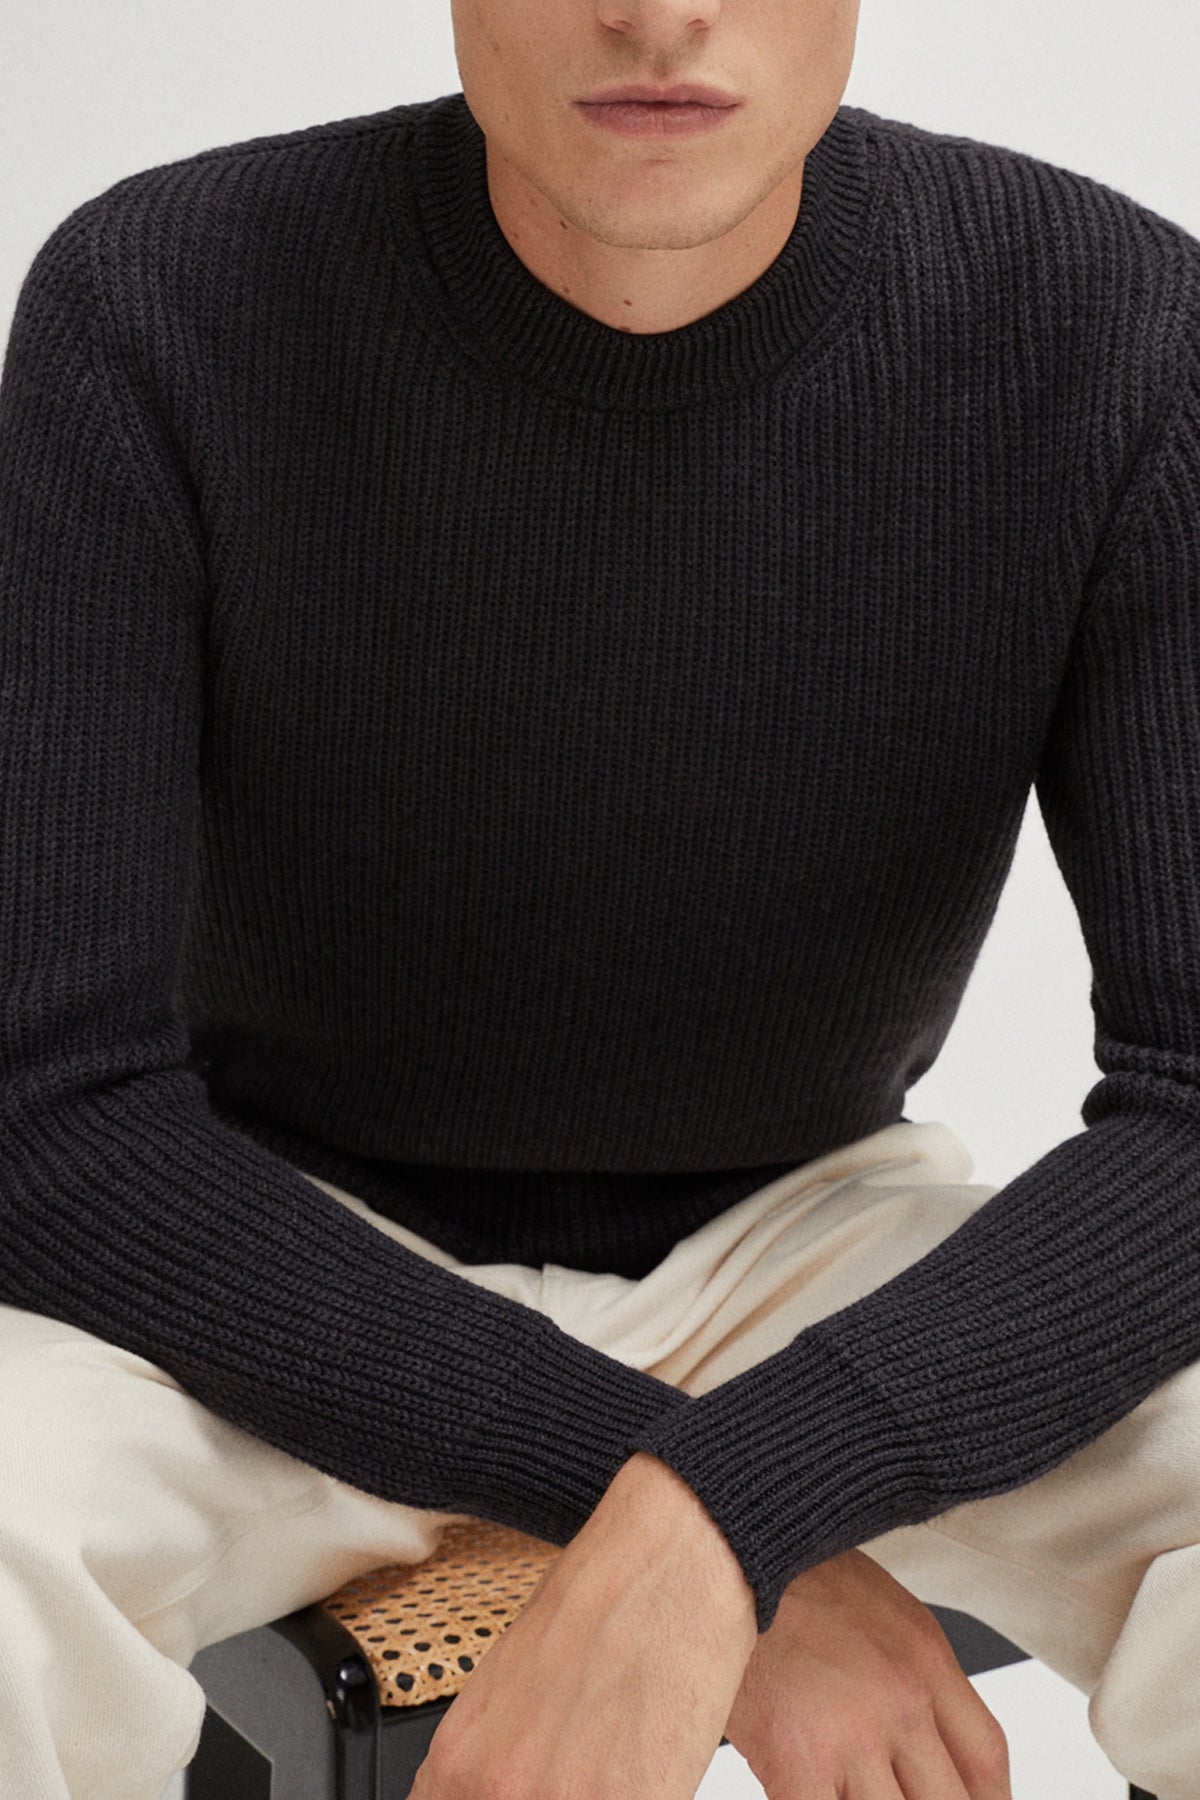 Anthracite Grey | The Merino Wool Perkins Sweater – Imperfect Version